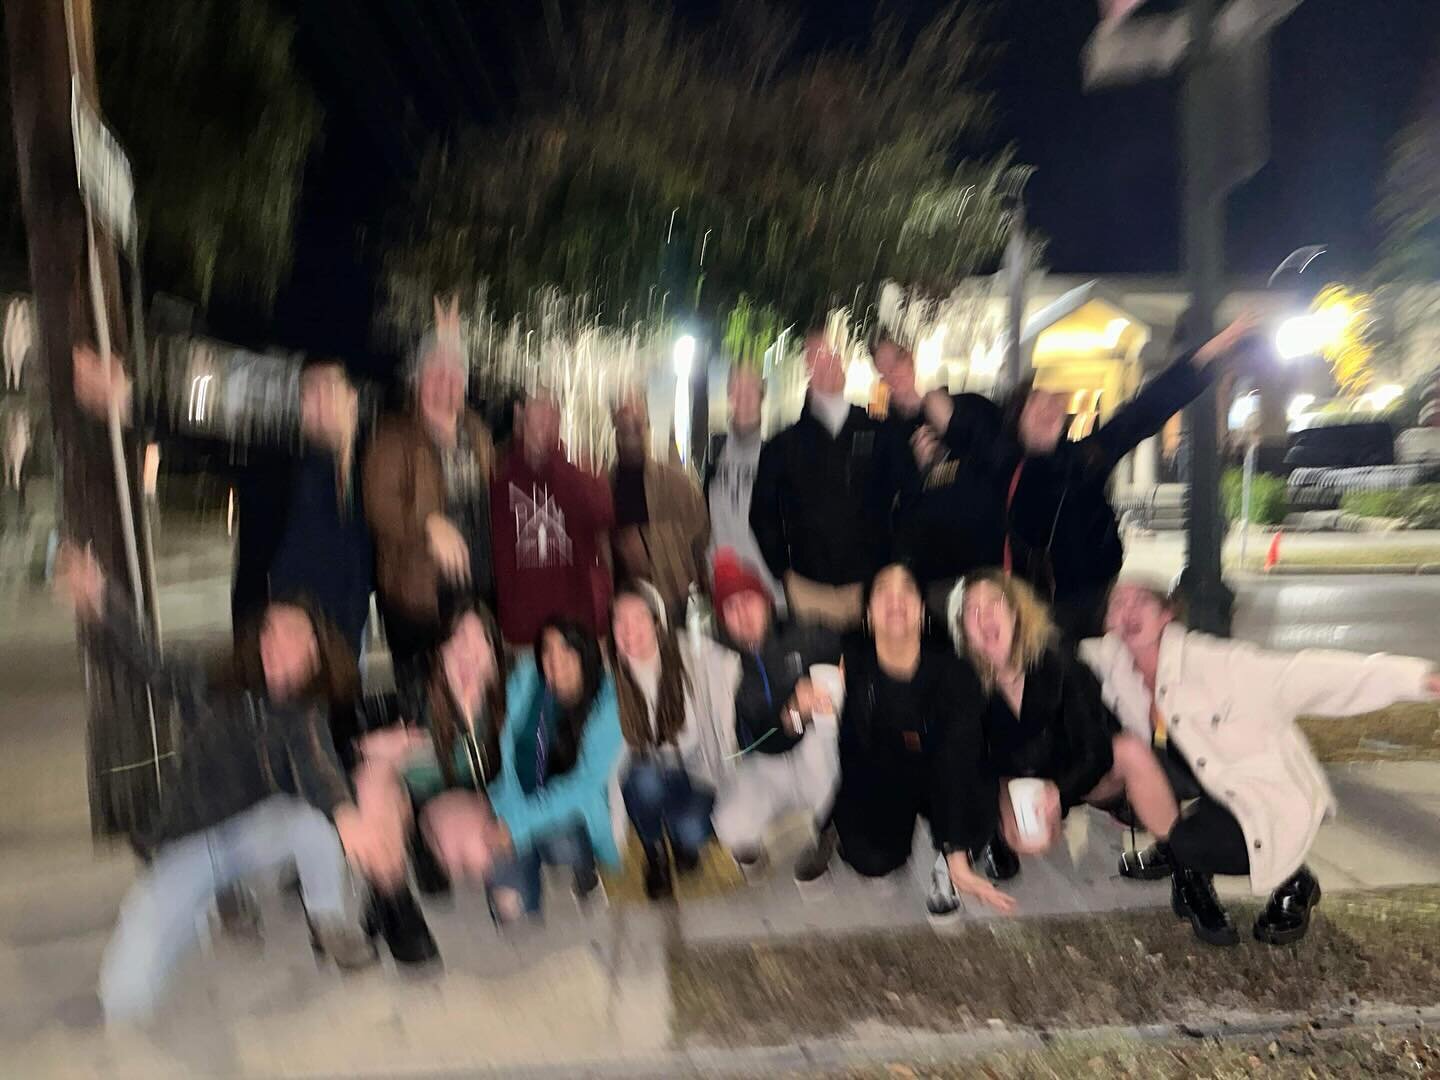 Blurred lines.  We are social, end of story.  Nightly pregame from 8pm followed by an adventure. Love our Krewe and our awesome guests. #party #partyhostel #backpacker #hostelsoftheworld #hostelsaremorefun #traveling #neworleans #culturalexchange #wo